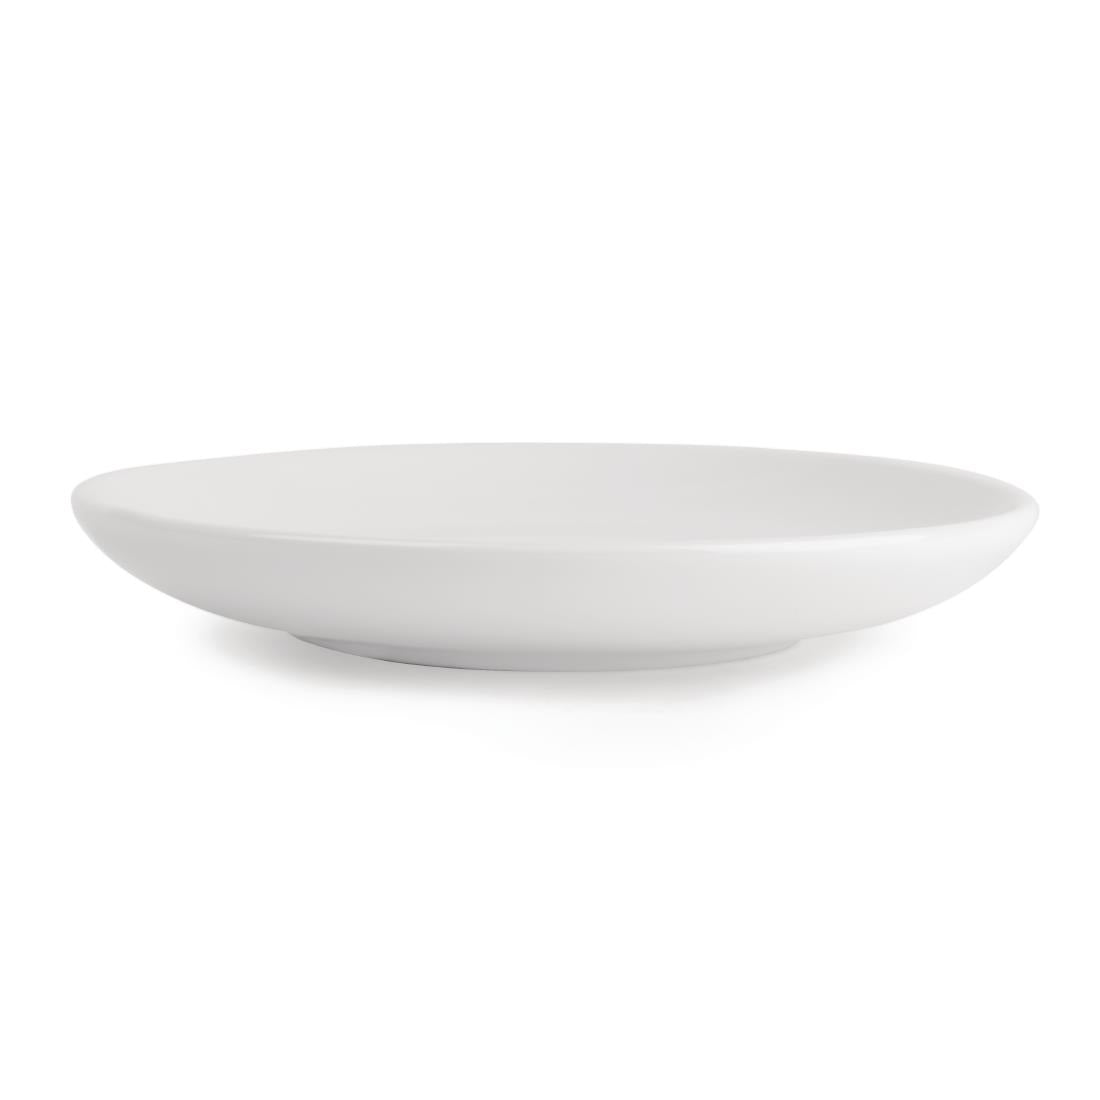 Royal Porcelain Classic White Cappuccino Saucers 150mm (Pack of 12)